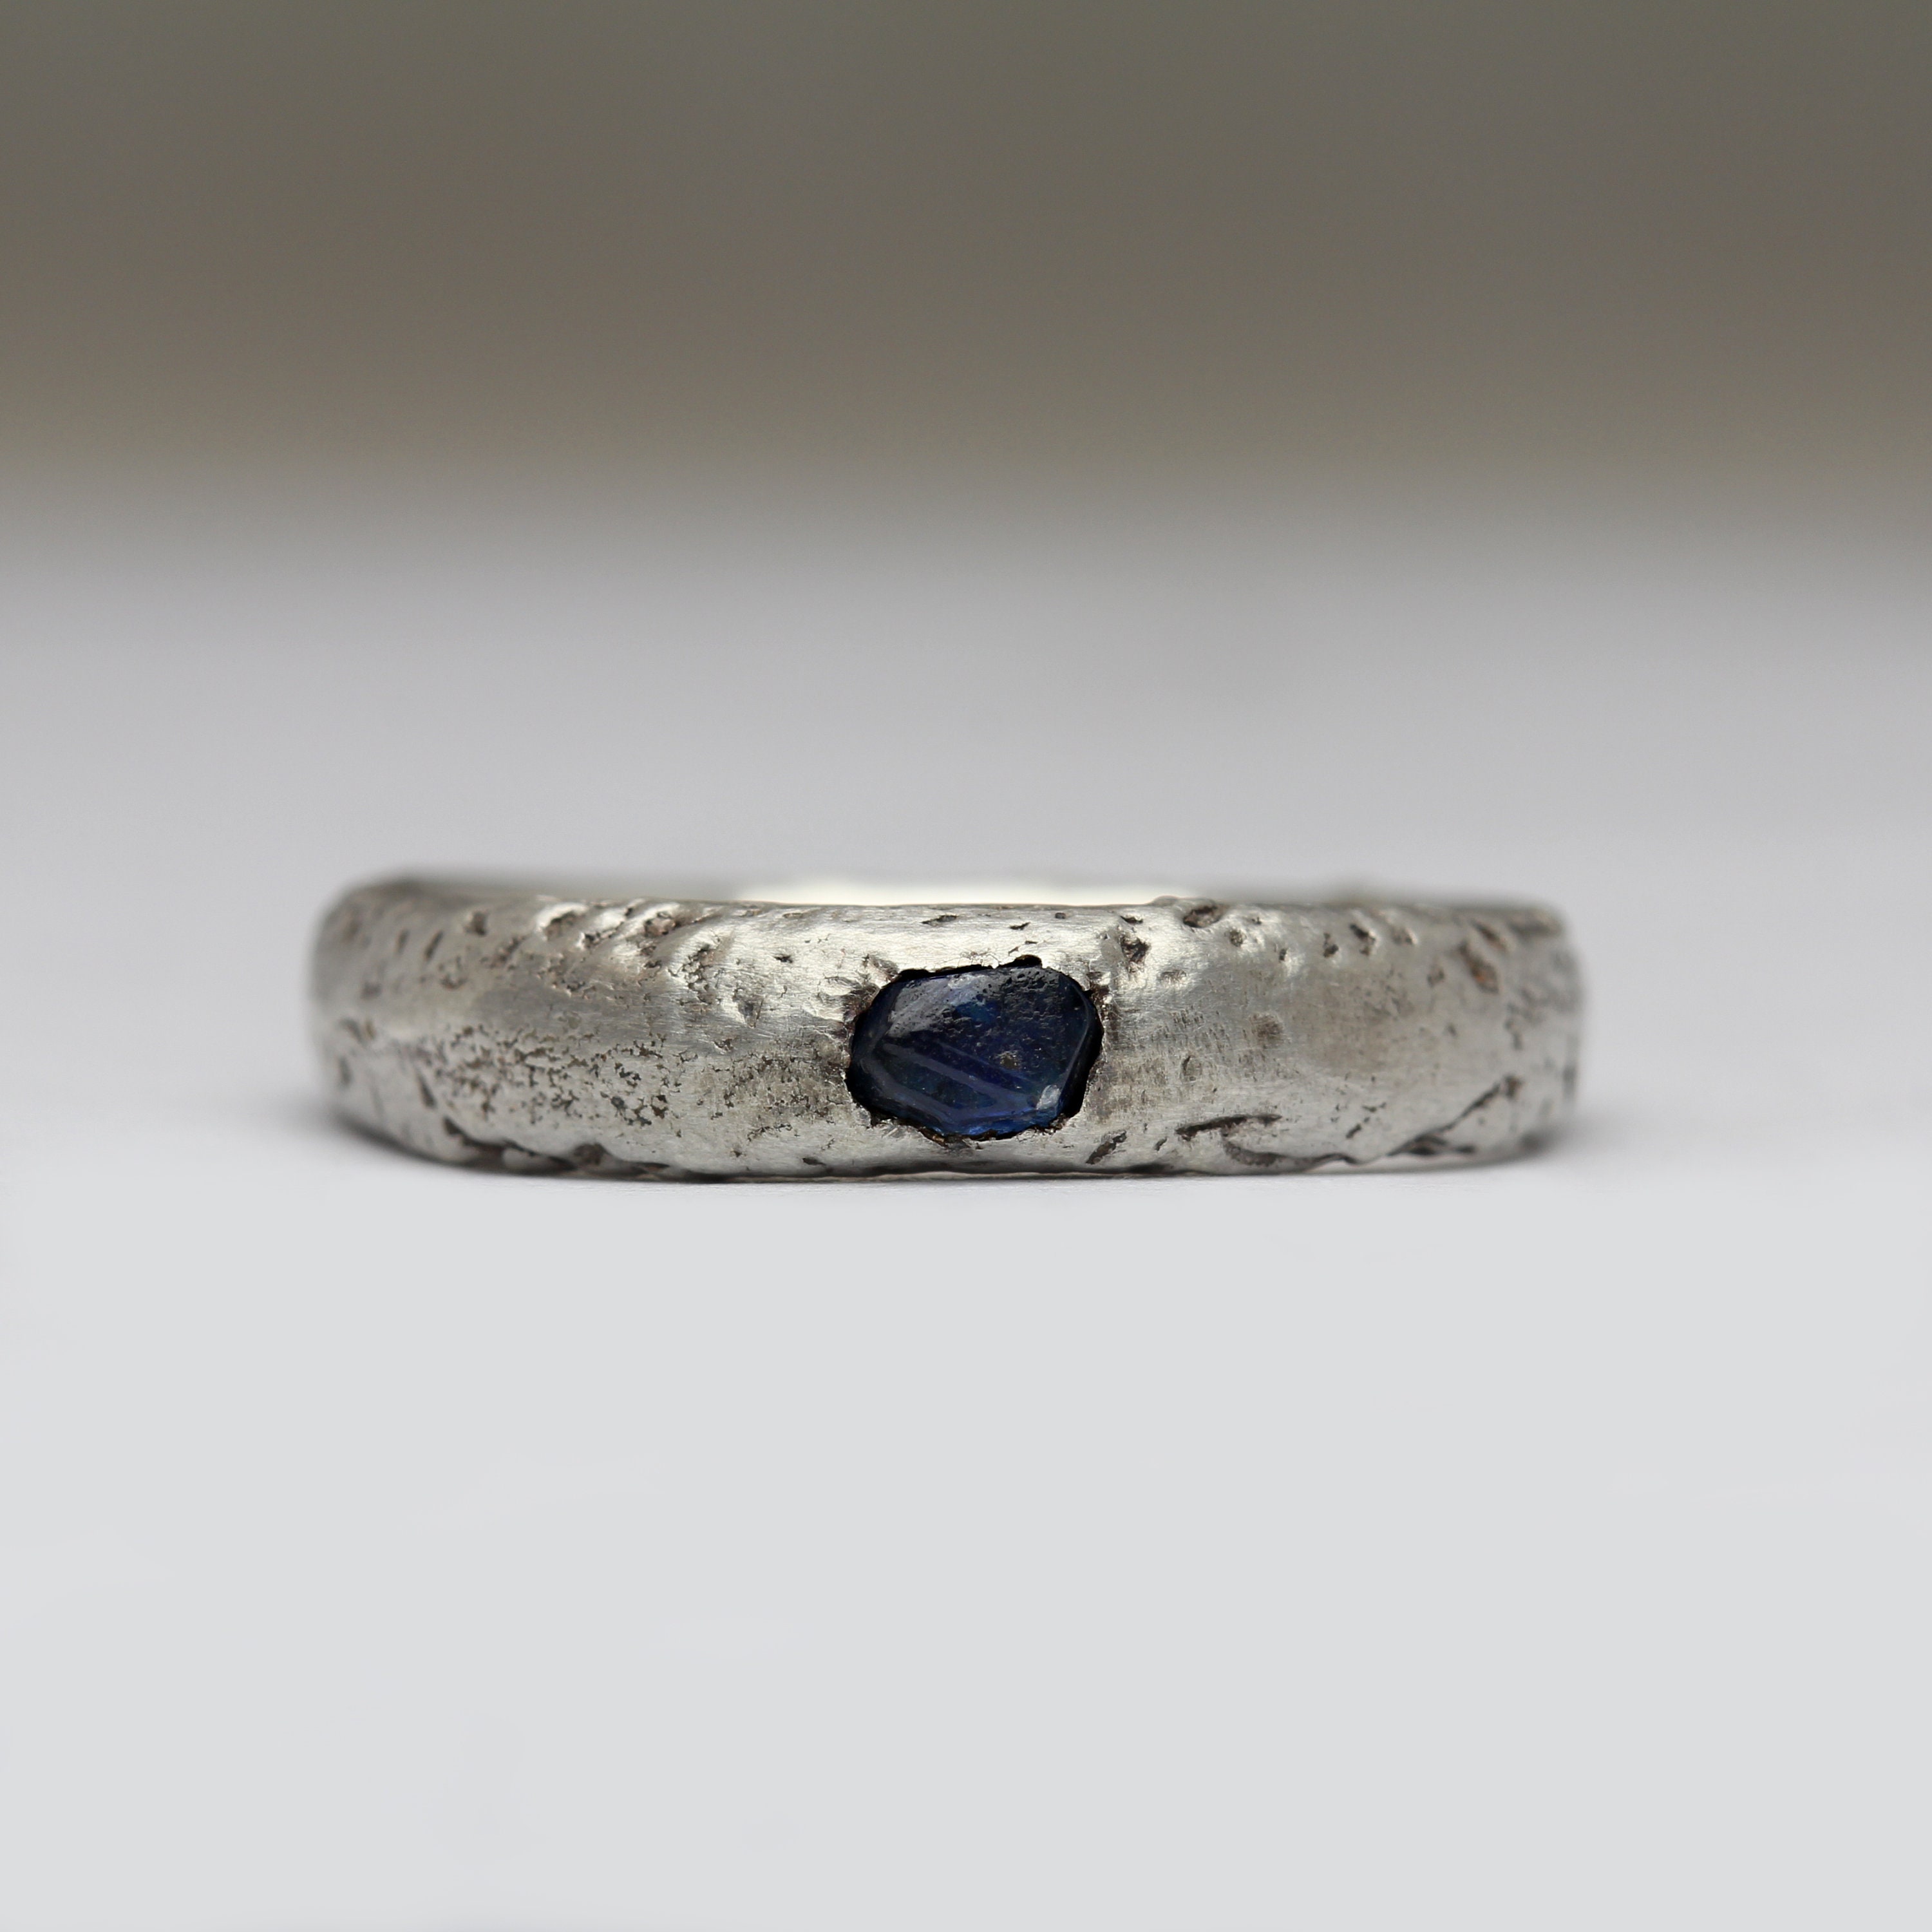 Rough Sapphire Ring - Cast in Beach Sand Raw Gemstone Inset Recycled Sterling Silver